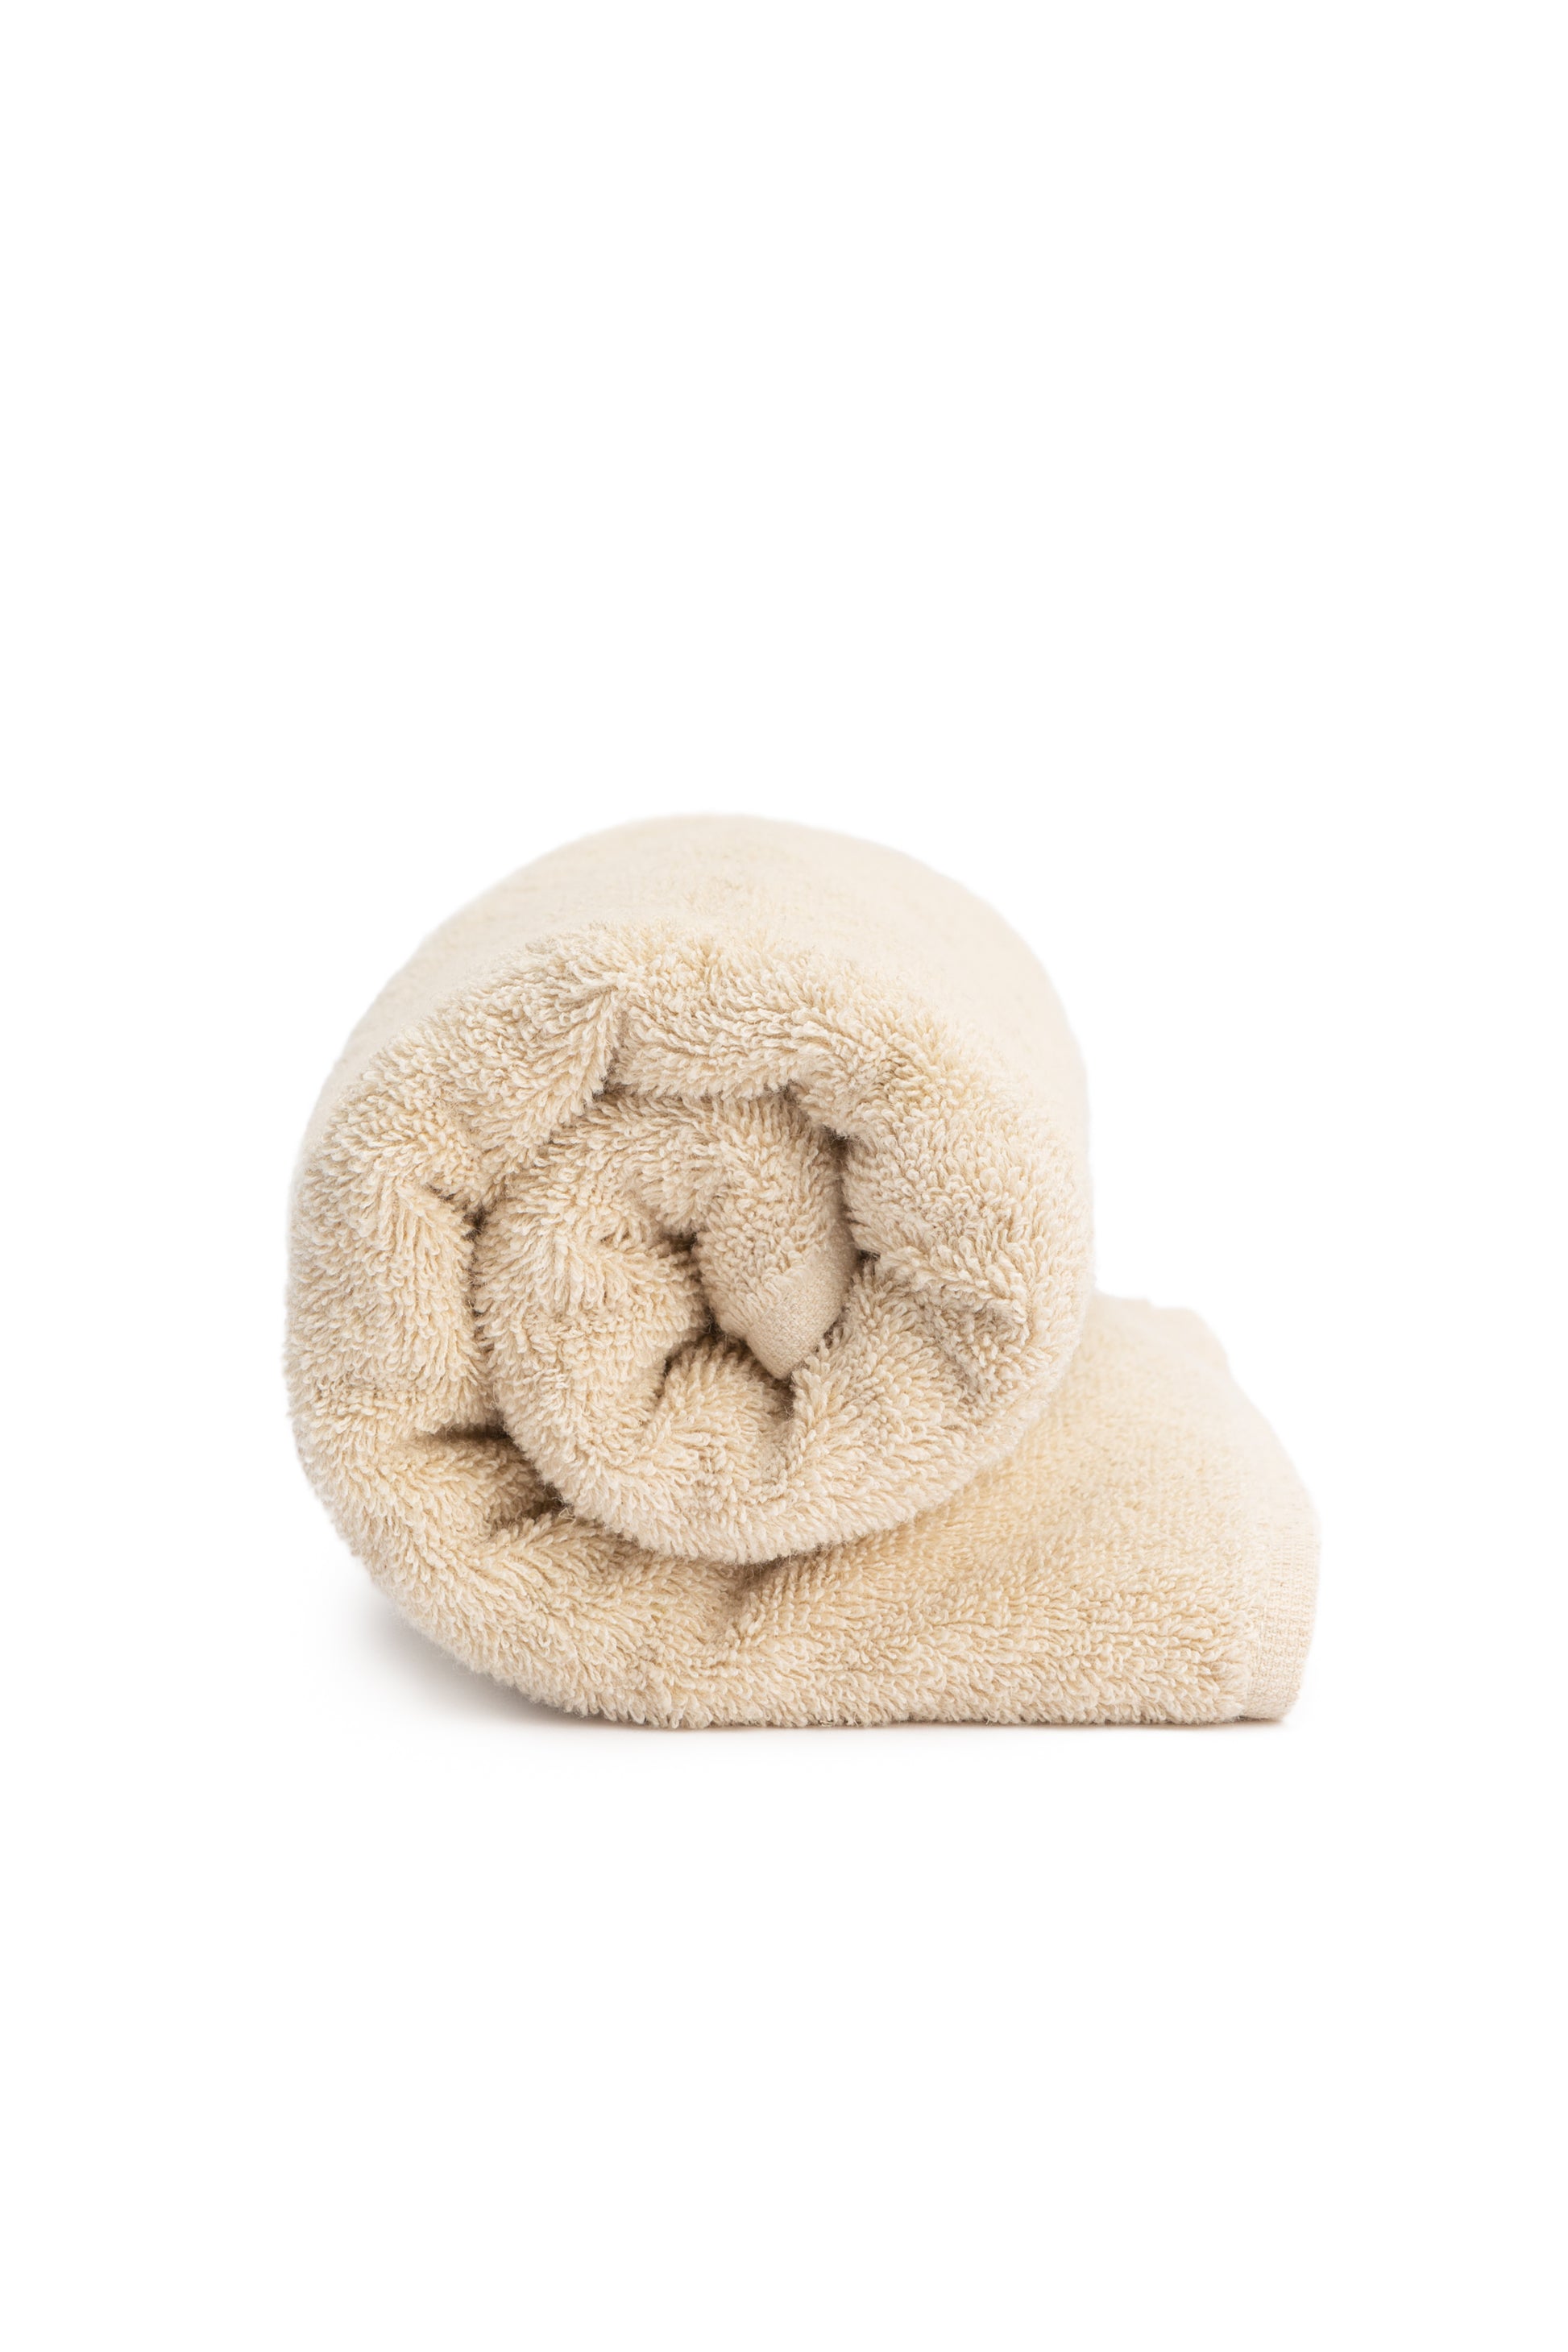 Rolled natural hand towel